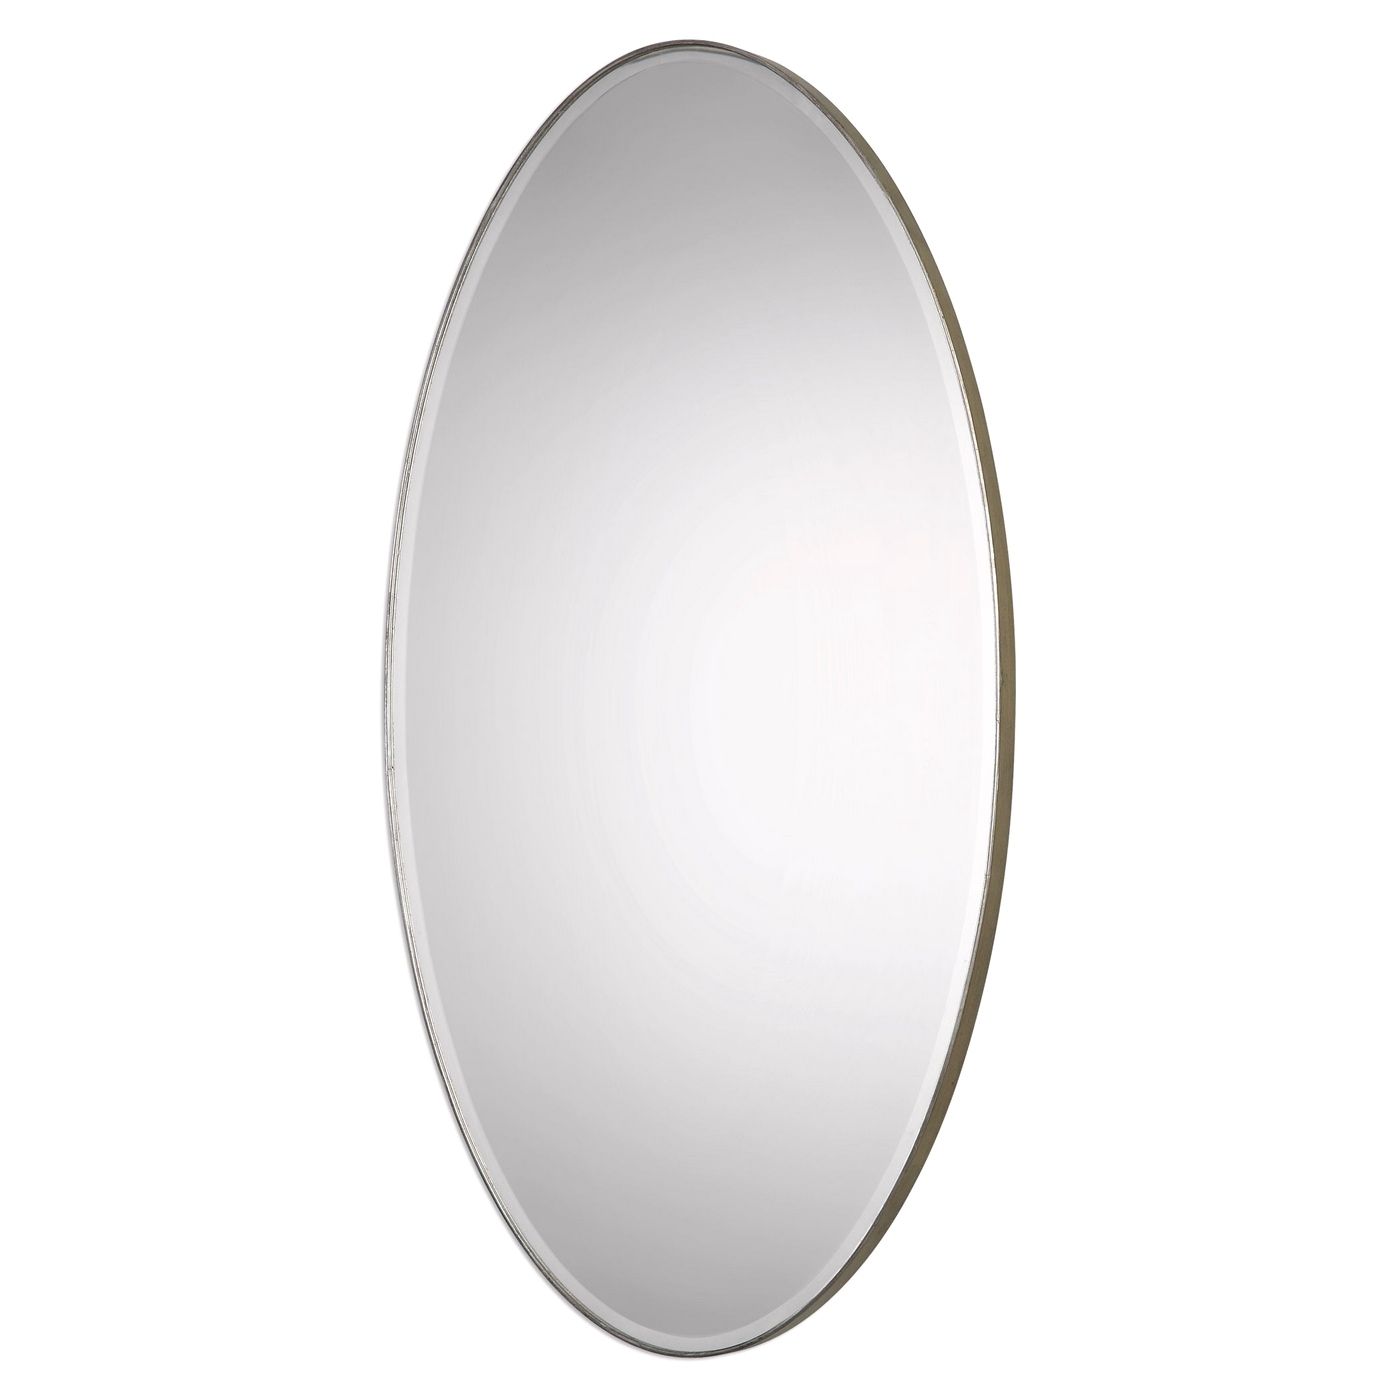 Chic Petra Large Oval Wall Mirror With Iron Frame In Silver Leaf Finish Inside Iron Frame Handcrafted Wall Mirrors (View 14 of 15)